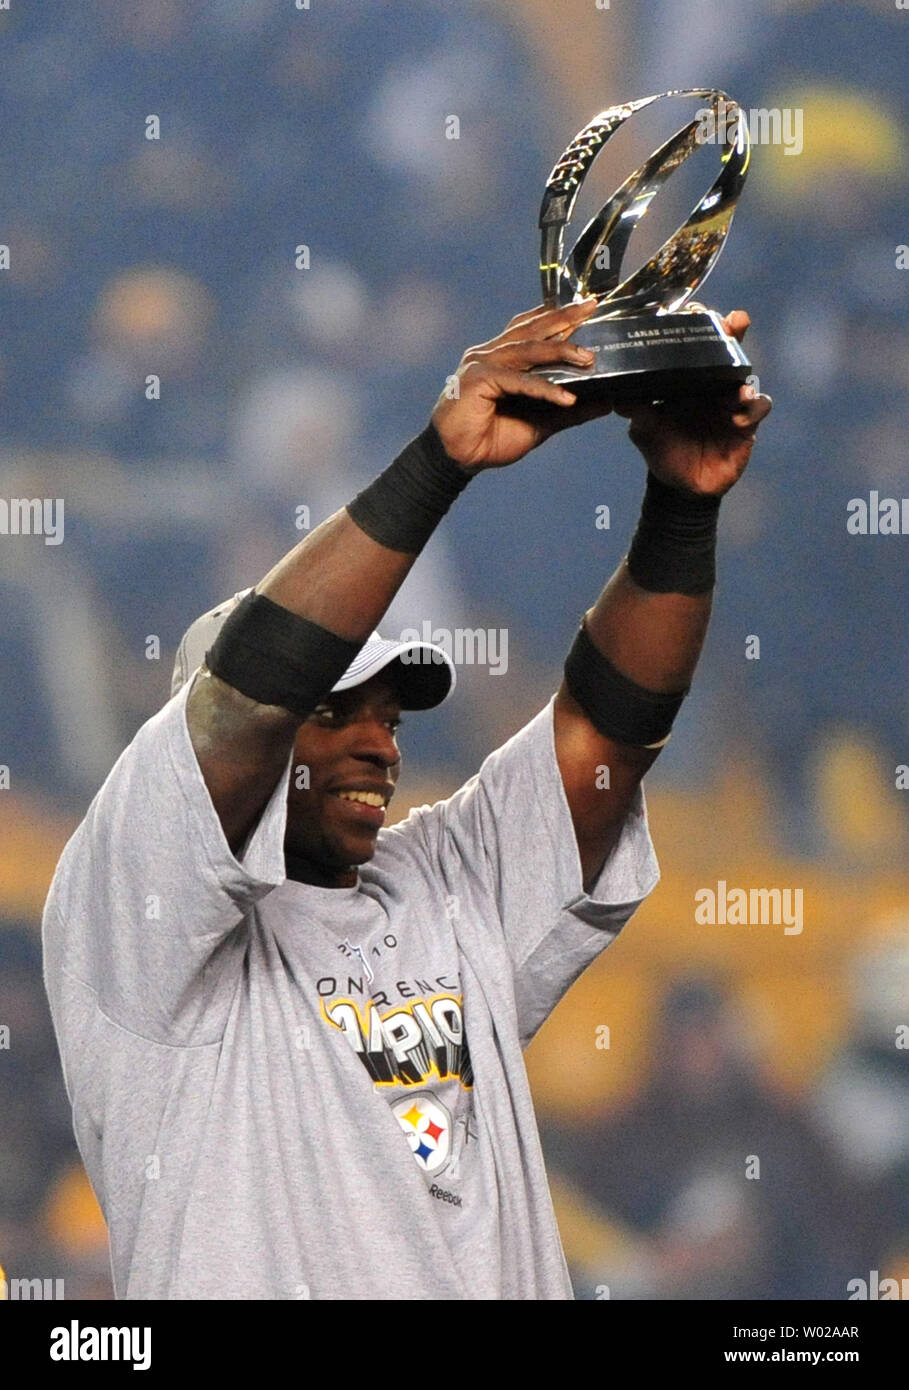 Pittsburgh Steelers' running back Rashard Mendenhall holds up the Lamar  Hunt Trophy after the Steelers defeated the New York Jets 24-19, winning  the AFC Championship, at Heinz Field in Pittsburgh, Pennsylvania on